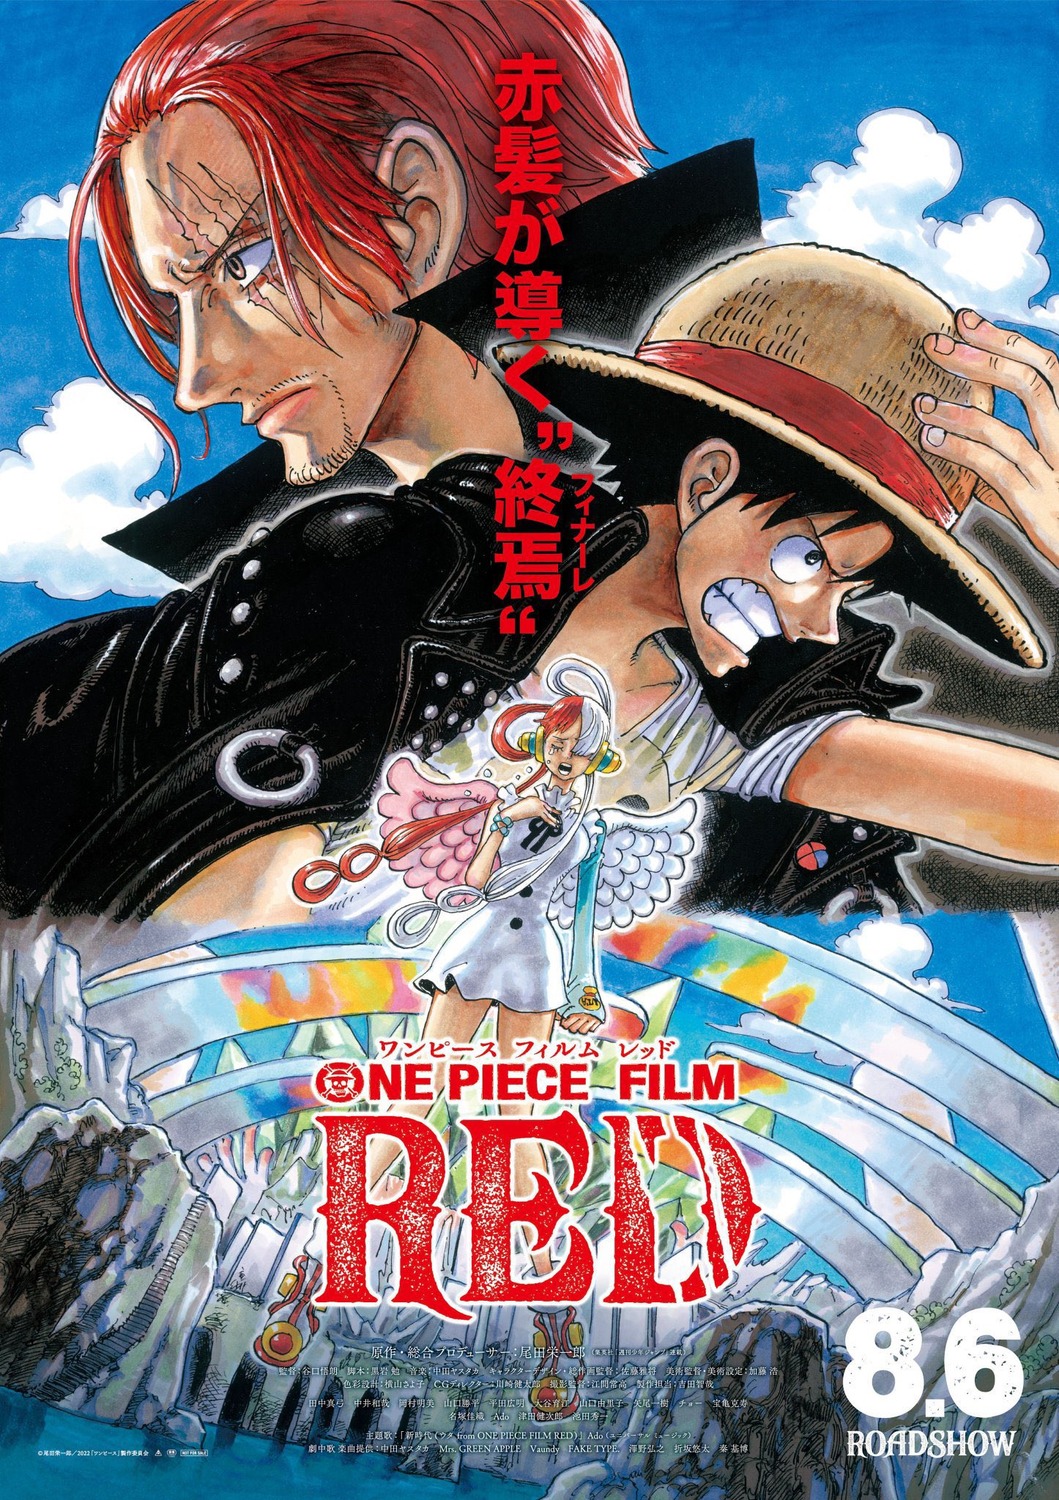 Extra Large Movie Poster Image for One Piece Film: Red 